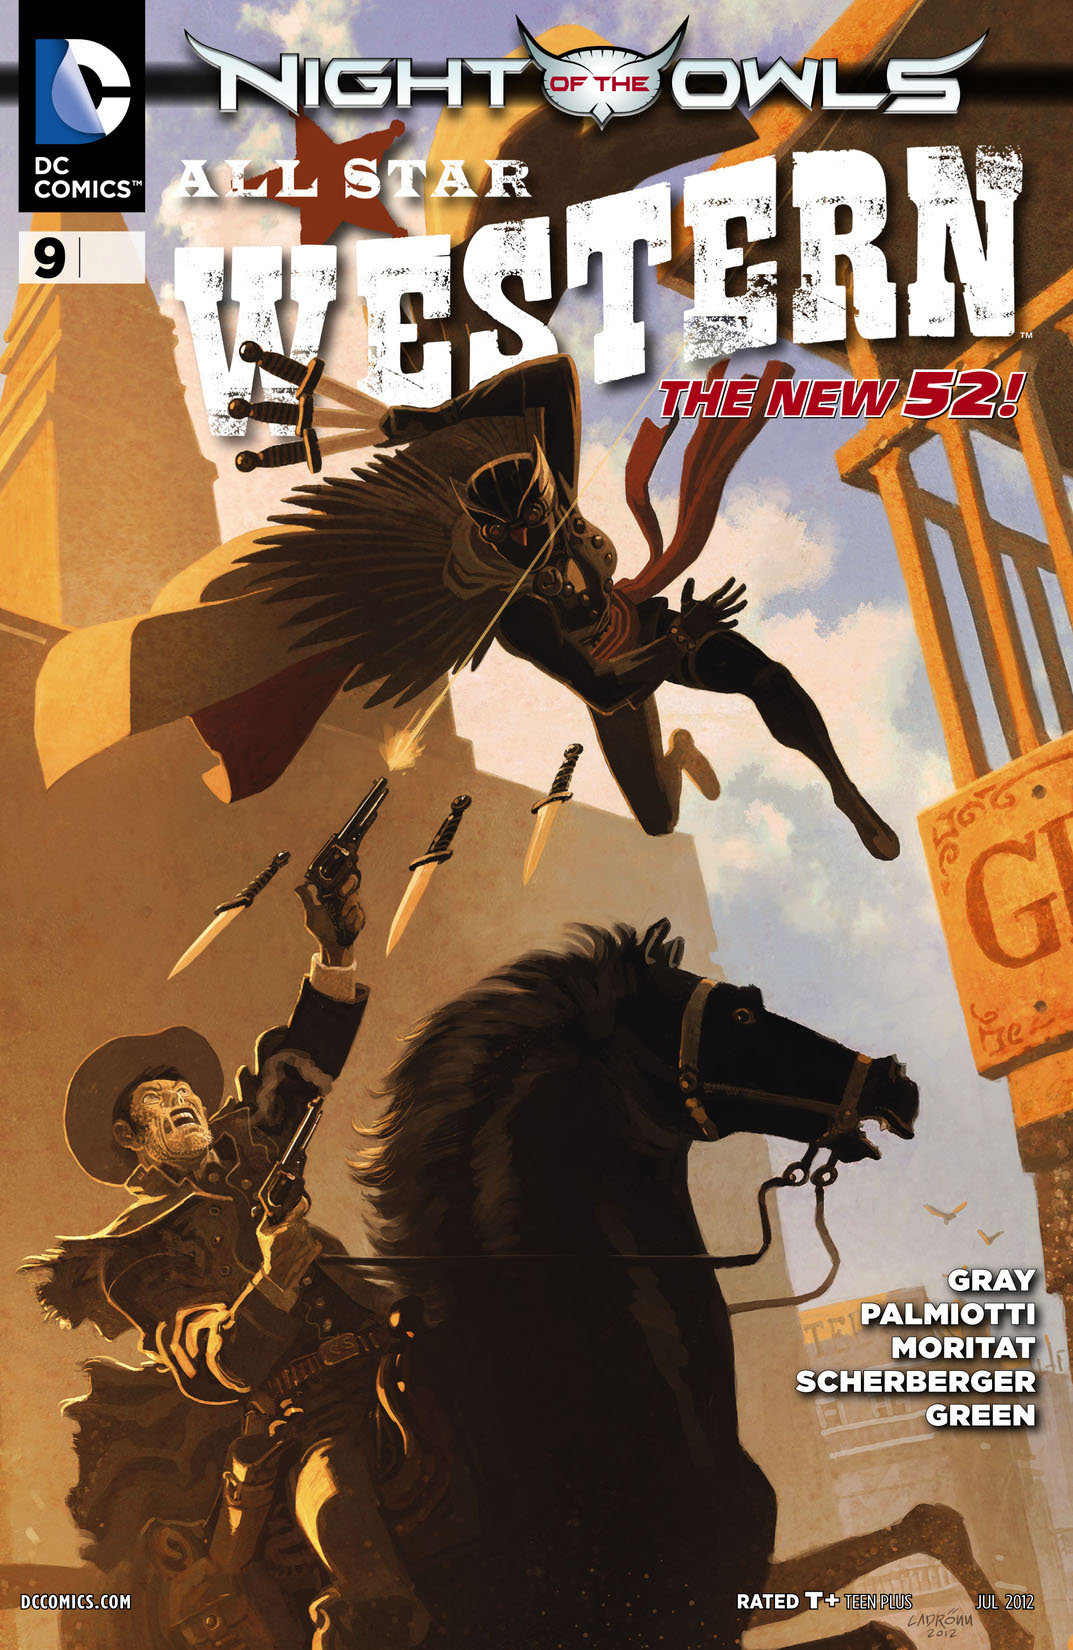 All Star Western #9 preview images